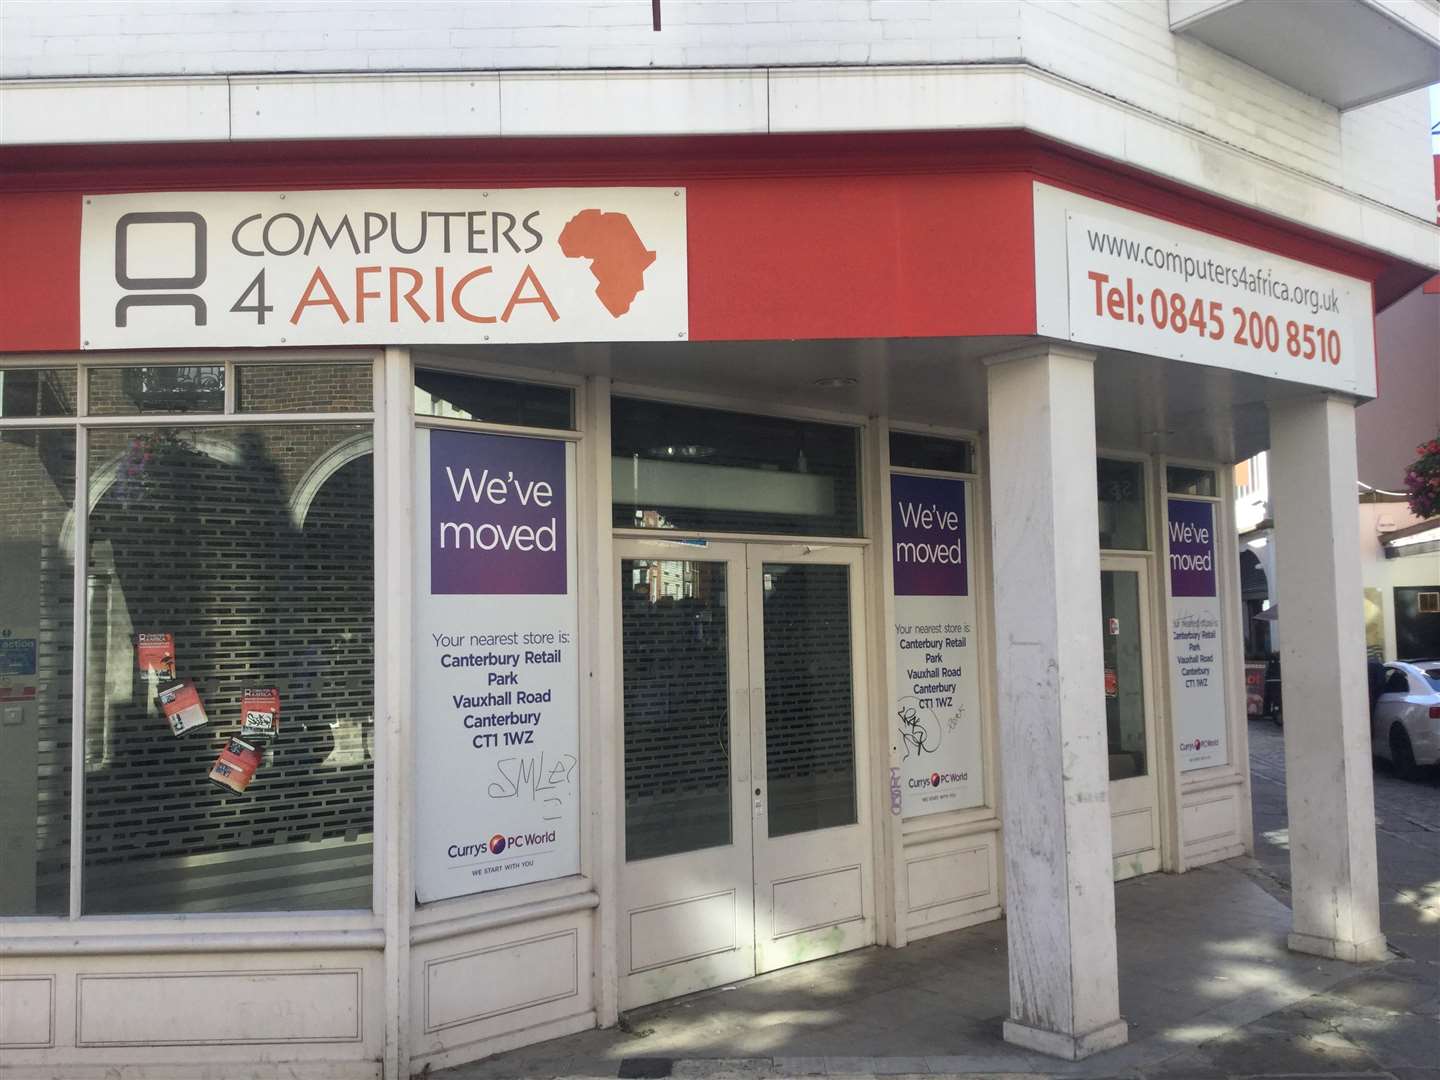 The Canterbuty store has been used just six times by Computers 4 Africa in the past year